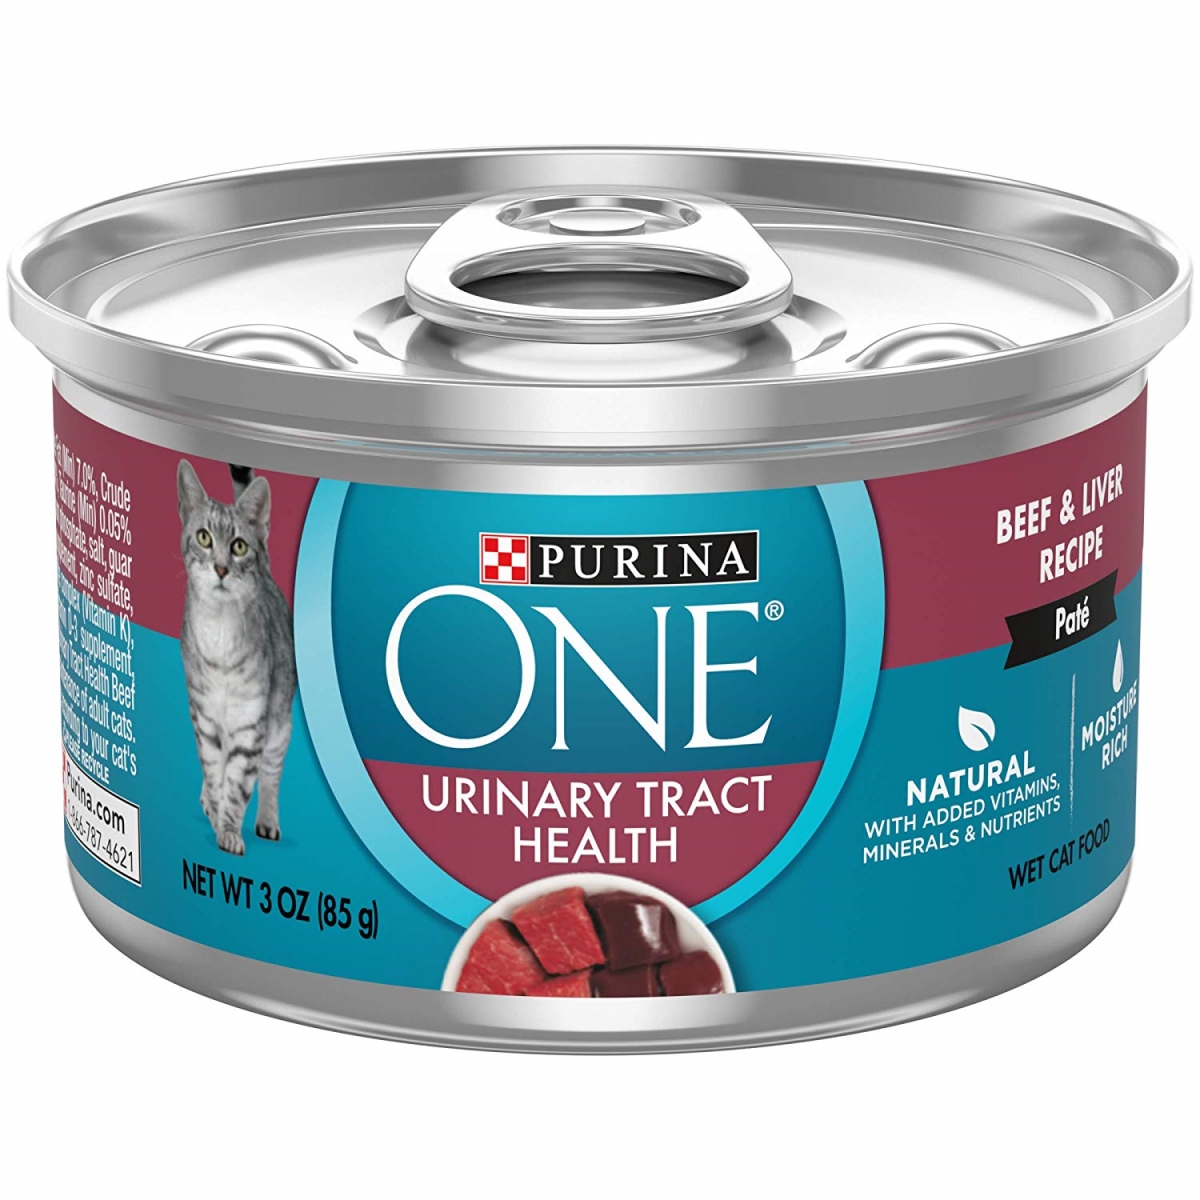 Purina 178893 3 Oz One Urinary Tract Health Beef & Liver Pate Cat Food, Case Of 12